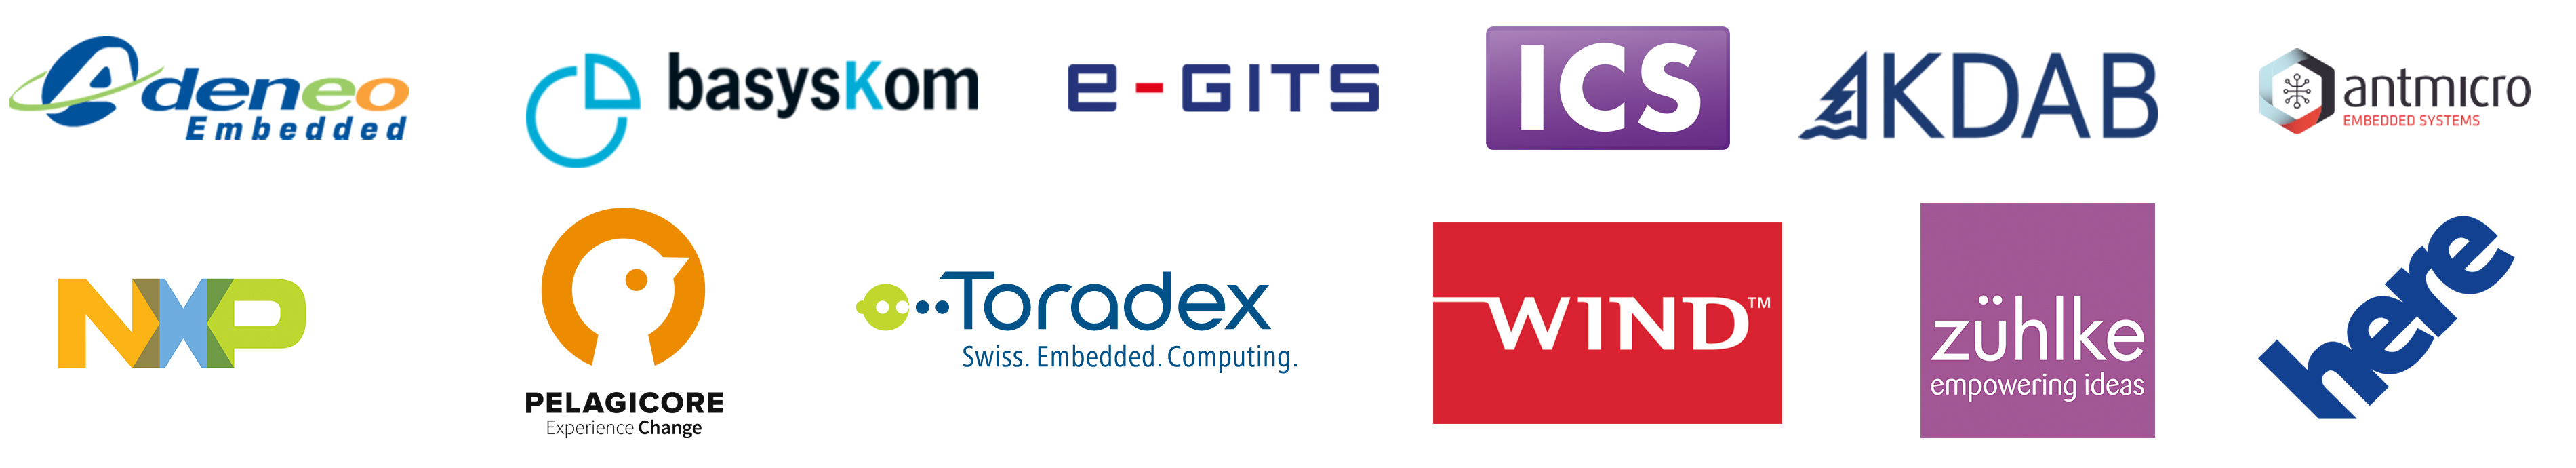 Qt Embedded World Demo Partners